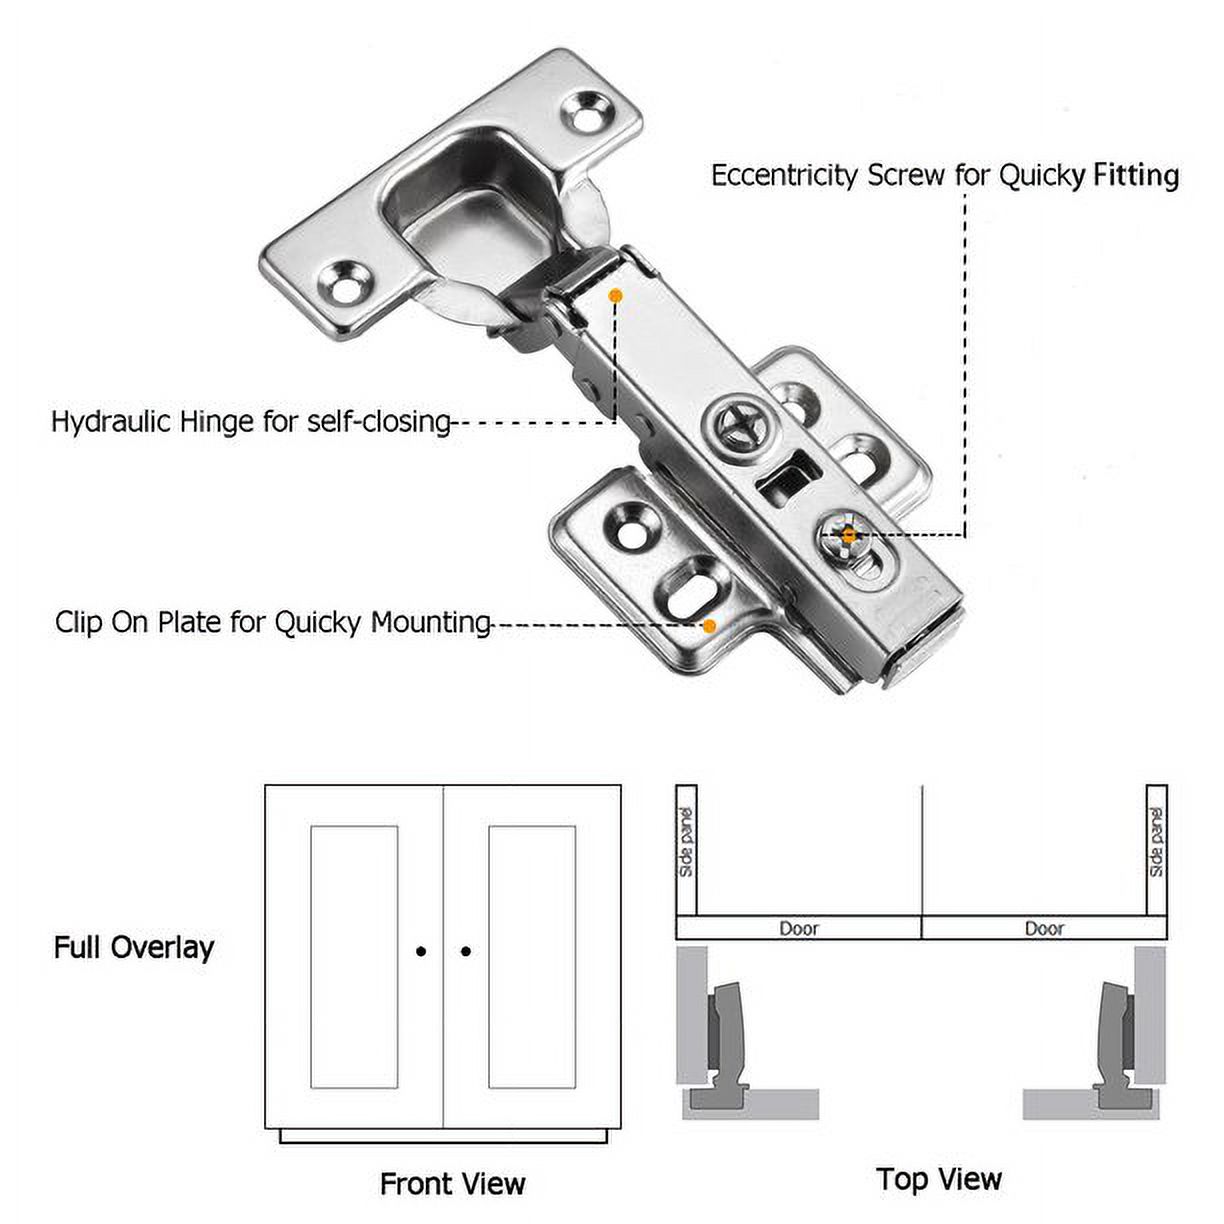 Luokim 4pcs Standard Cabinet Hinge,Fit for Frameless Cabinet,European Full Overlay,Soft Closing,Four-Hole mounting Plate Hinges,Nickel Plated Finish - image 5 of 7